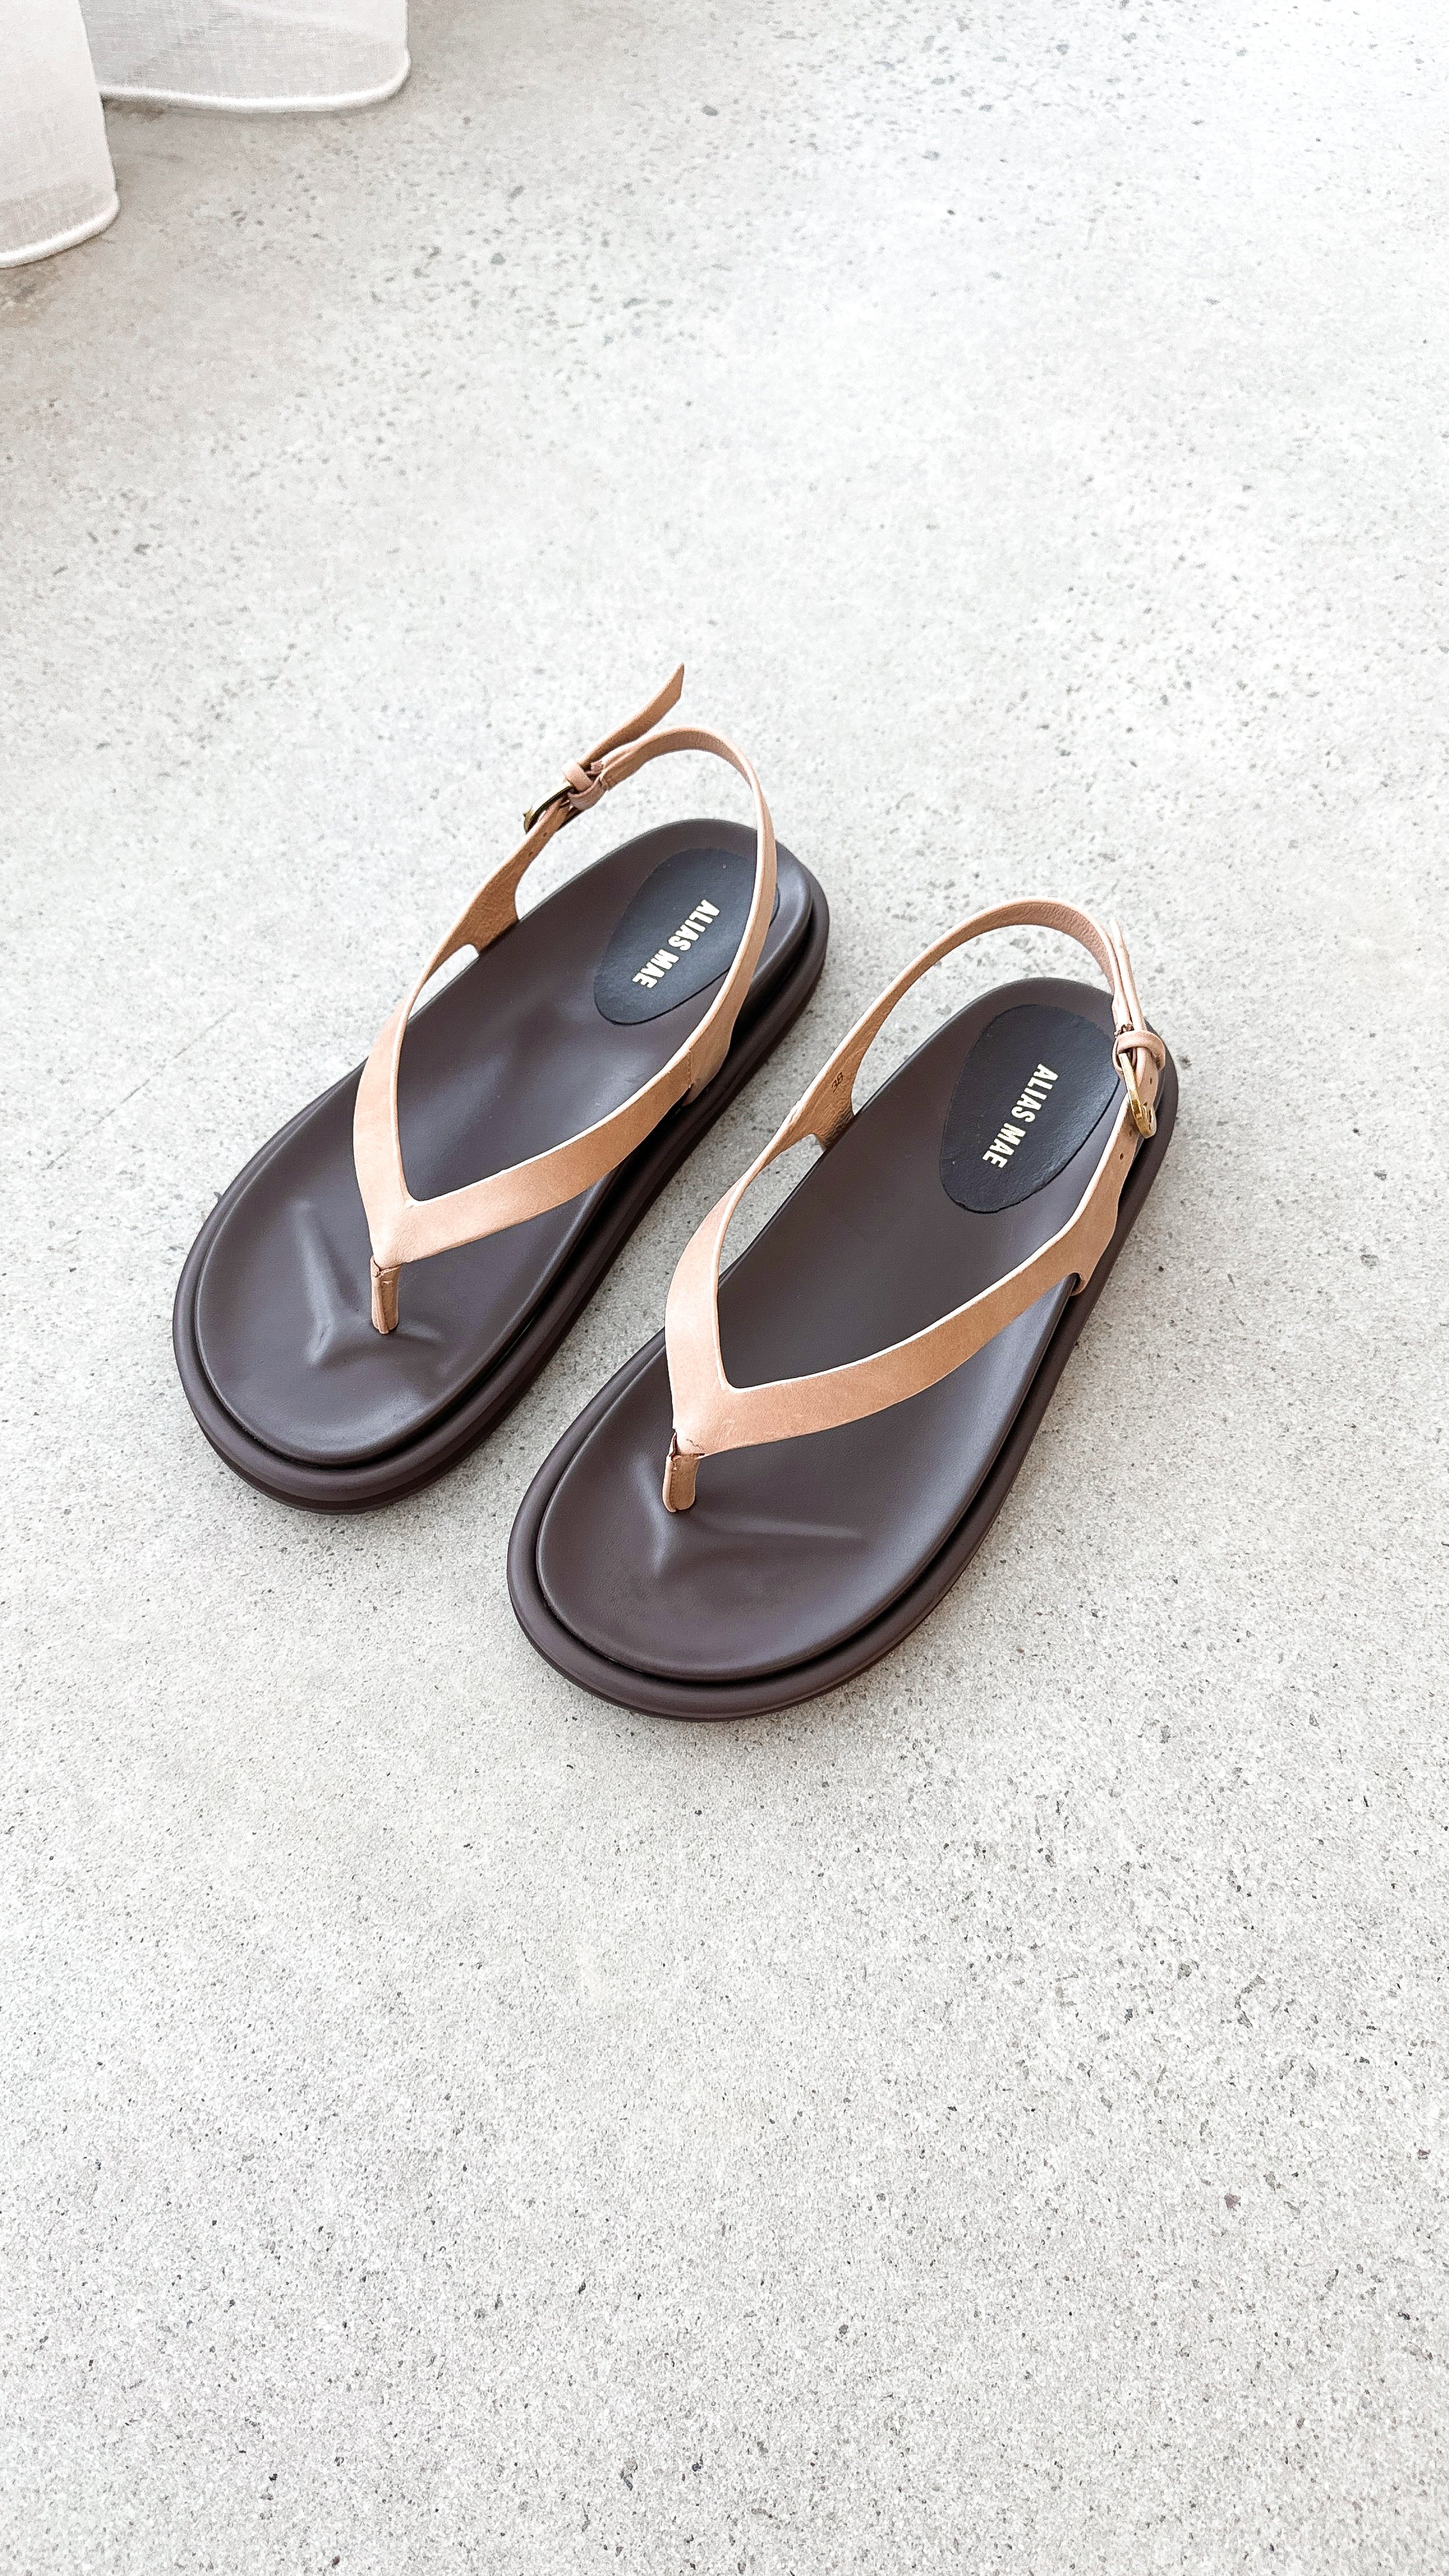 Daisy Slide - Natural Leather